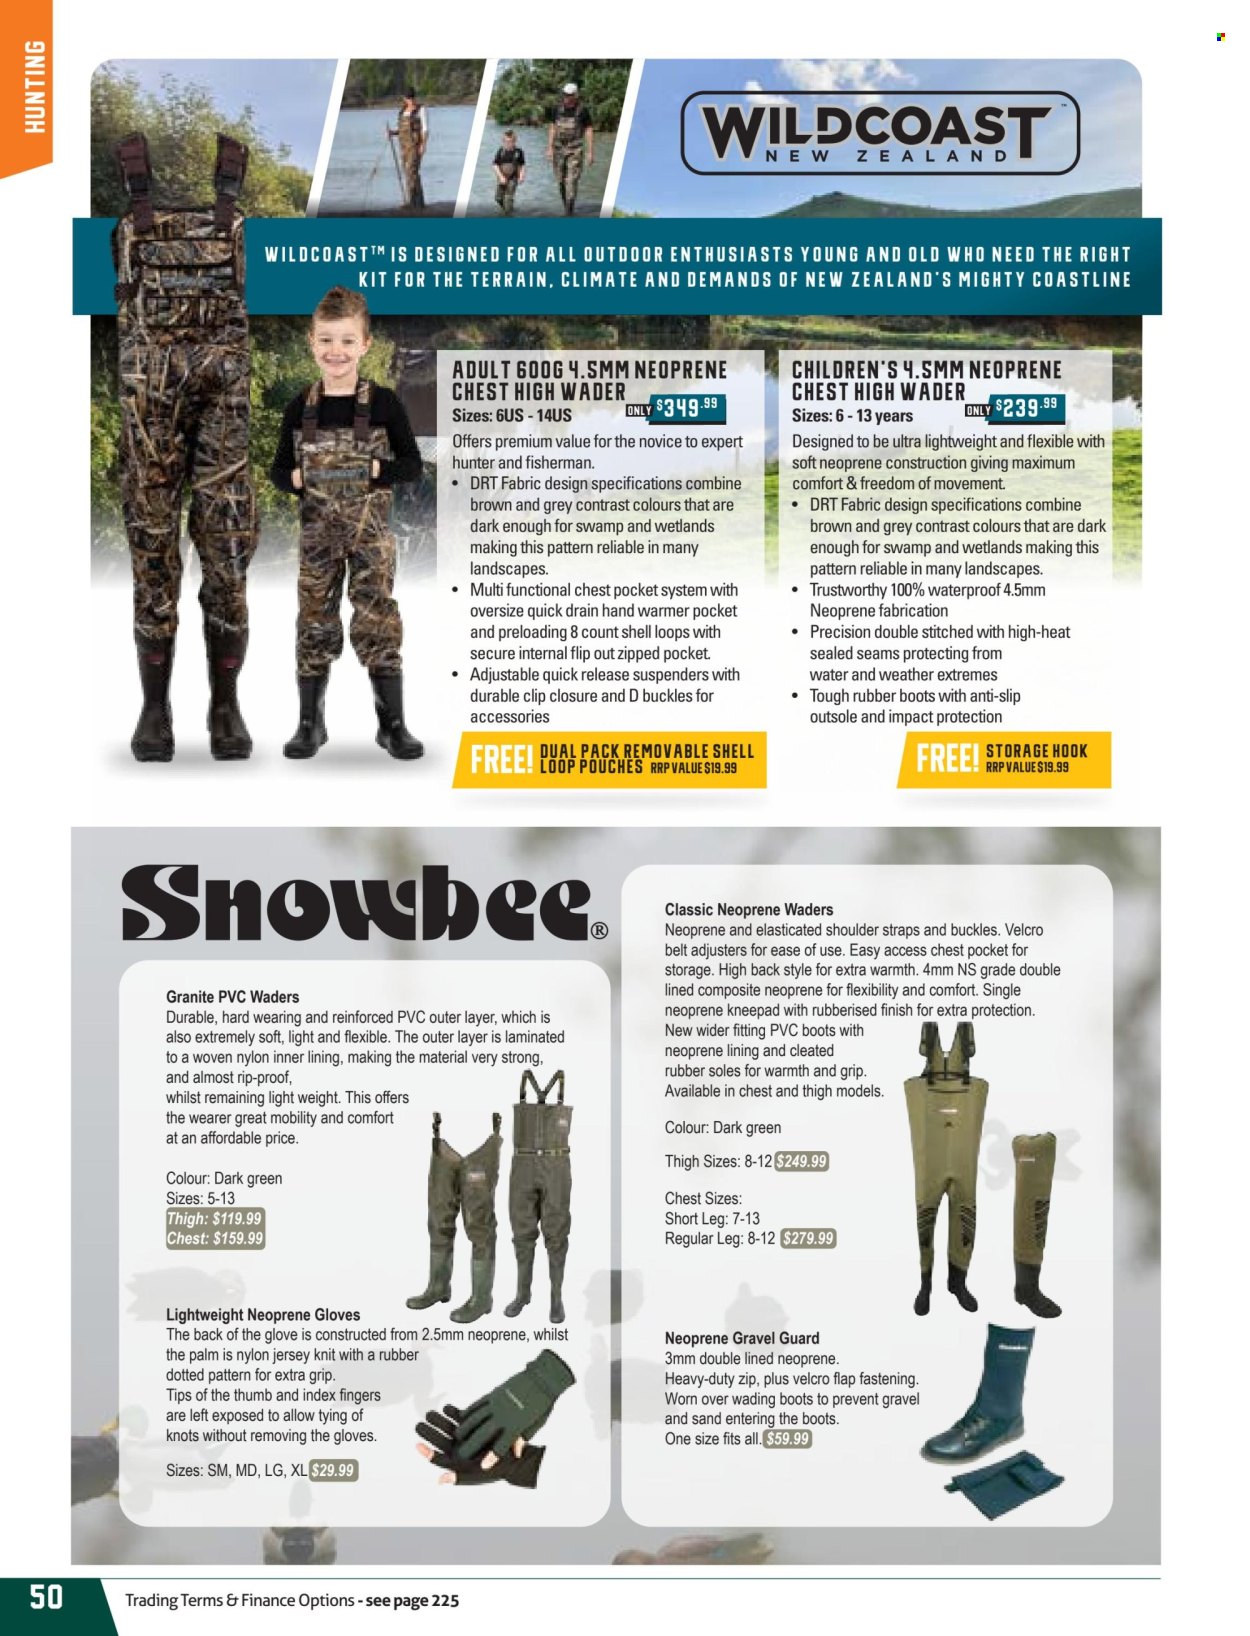 thumbnail - Hunting & Fishing mailer - Sales products - boots, LG, gloves, Hunter, rubber boots, hand warmer, wading boots, fishing accessories. Page 50.